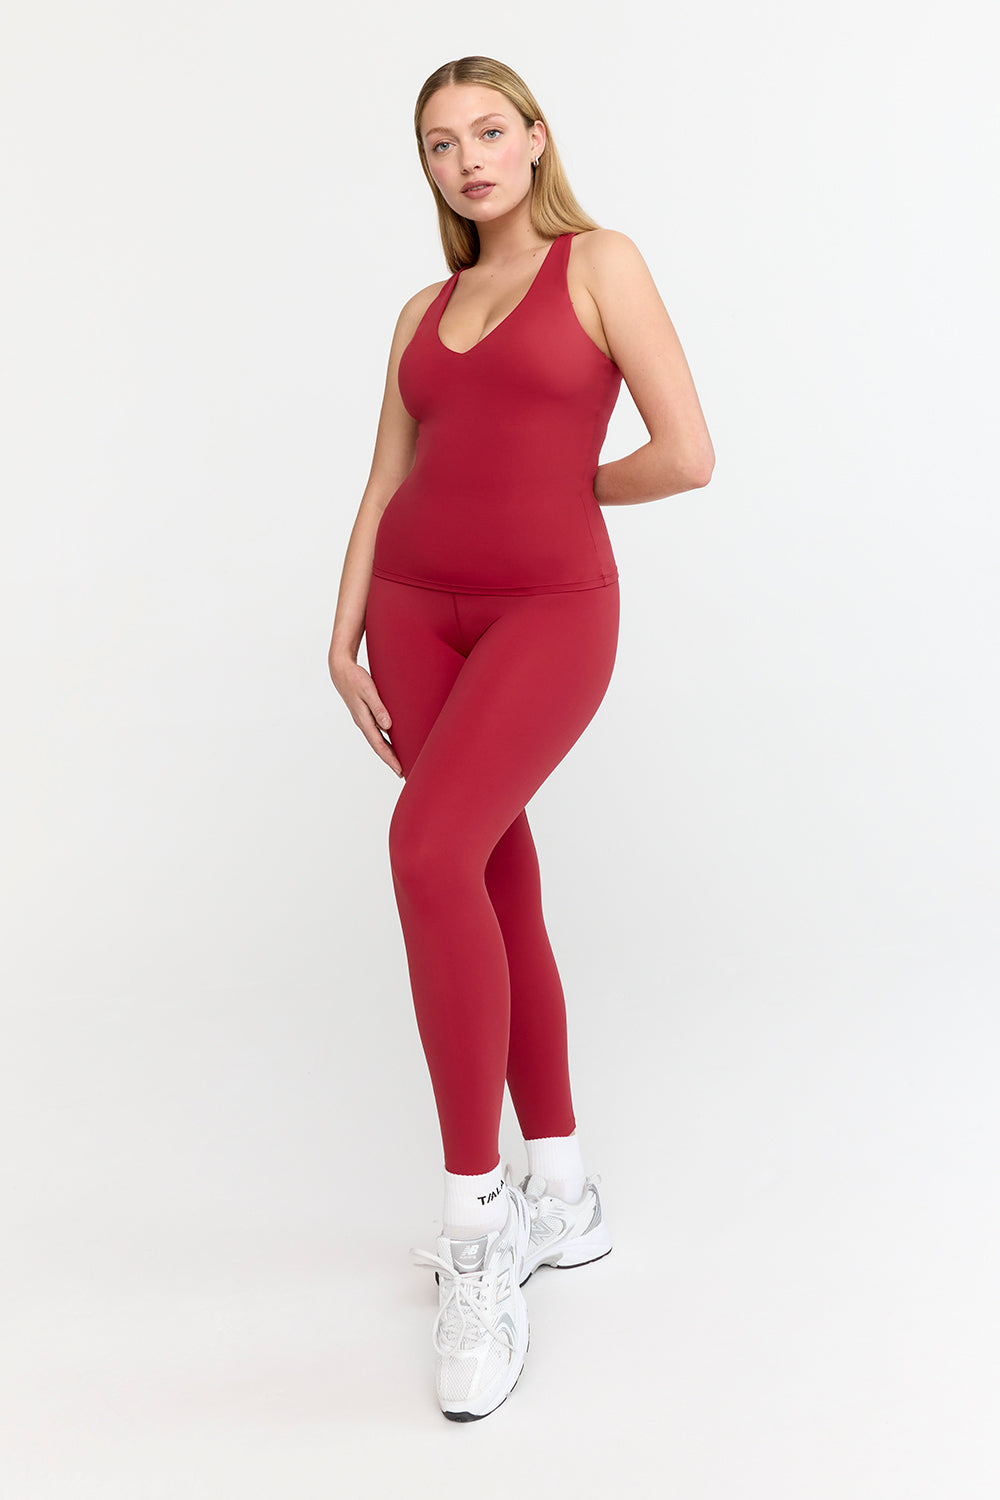 Best Plus-Size Leggings That'll Get You Through Any Workout